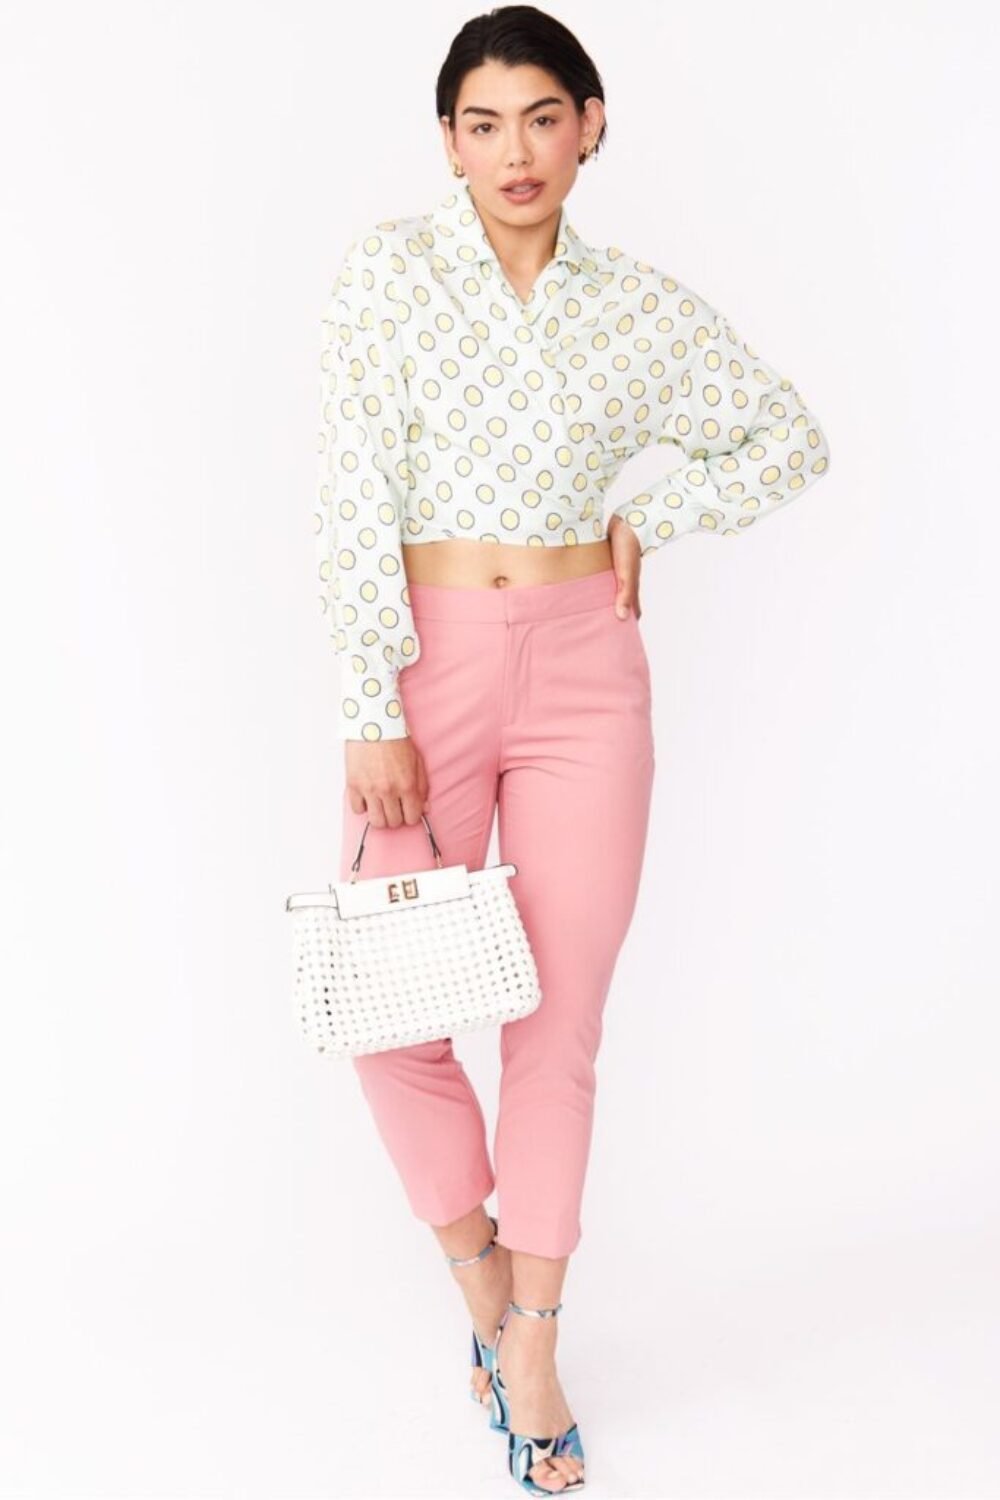 Shop Lux Sustainable Rose Petal Blouse with Spots in baby blue and women's luxury and designer clothes at www.lux-apparel.co.uk